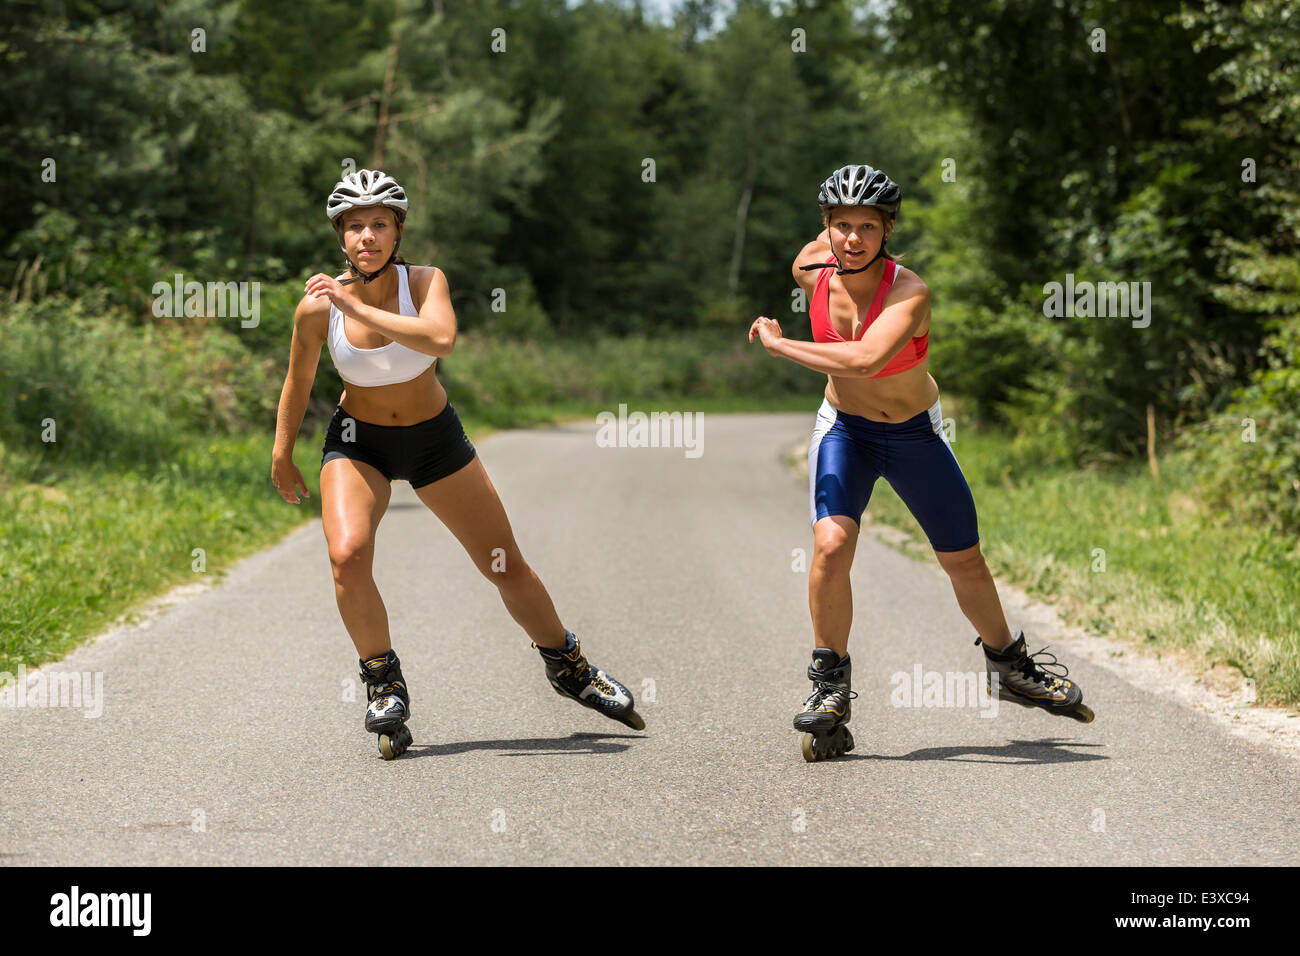 Young women, 19 years, inline skating, country road, Schurwald, Baden-Württemberg, Germany Stock Photo